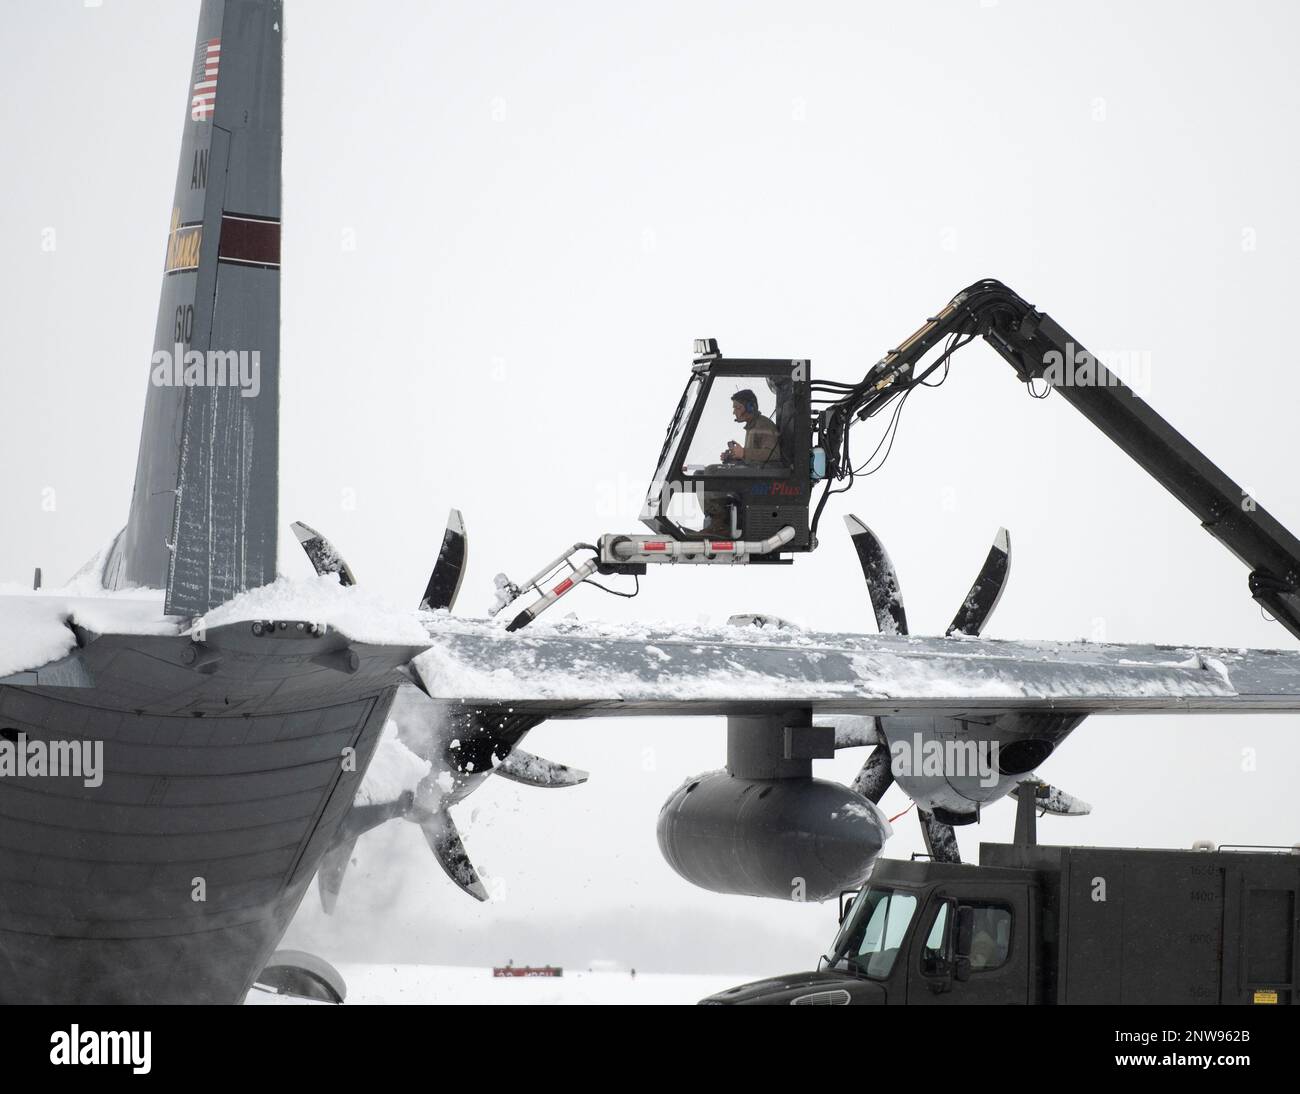 U.S. Air Force Airman from the 133rd Aircraft Maintenance Squadron used a Global Deicer Truck to de-ice a C-130 Hercules in St. Paul, Minn., Jan. 4, 2023. The snowstorm brought 14.9 inches of snow to the Minneapolis-St. Paul International Airport. Stock Photo